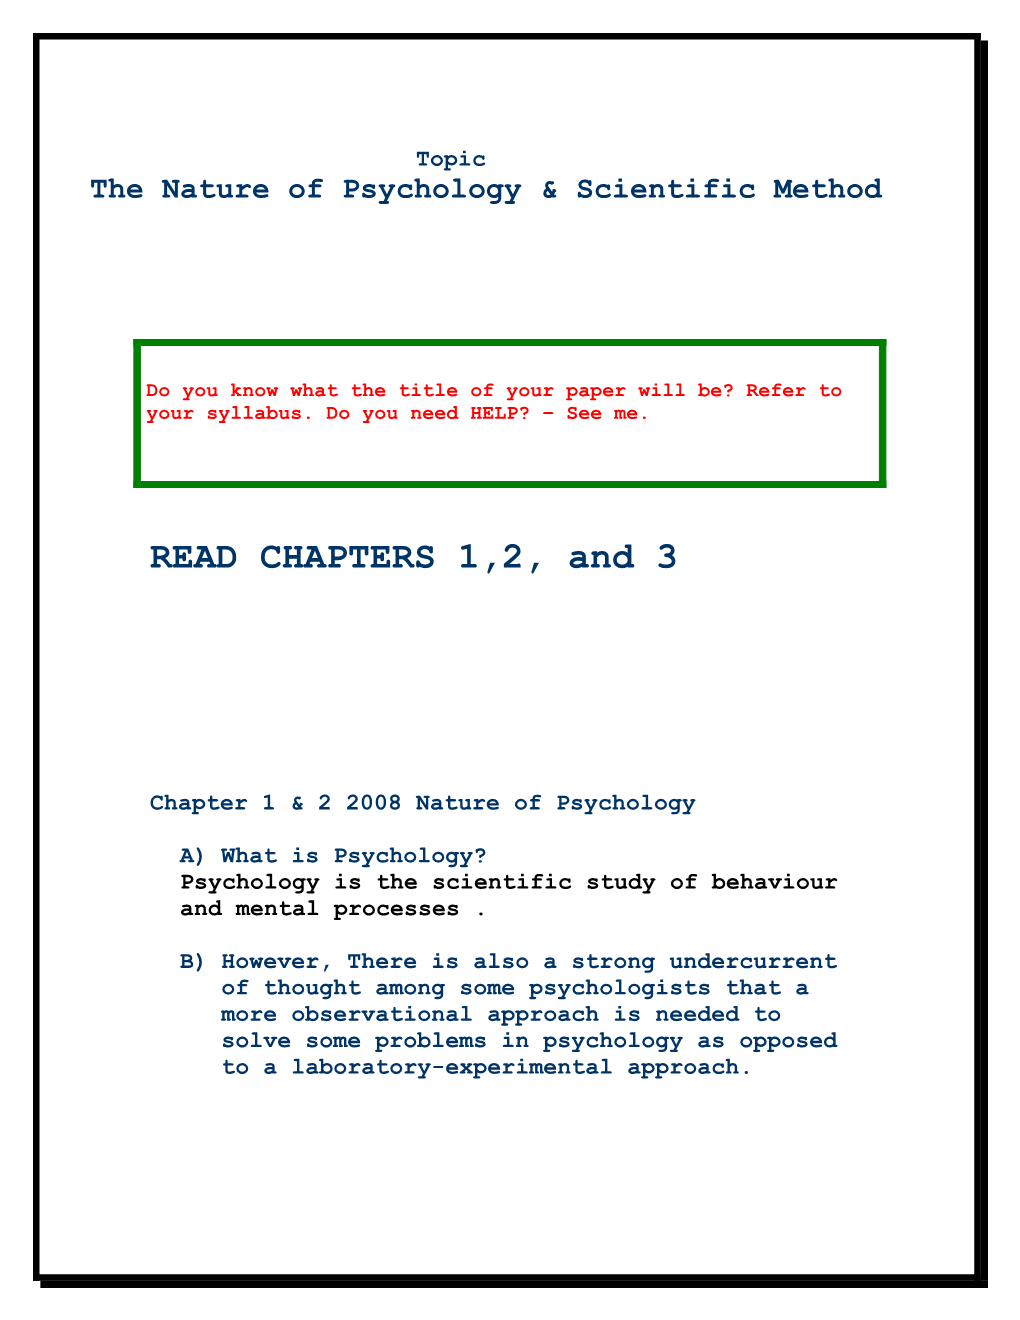 Chapter 1 2005 Nature of Psychology